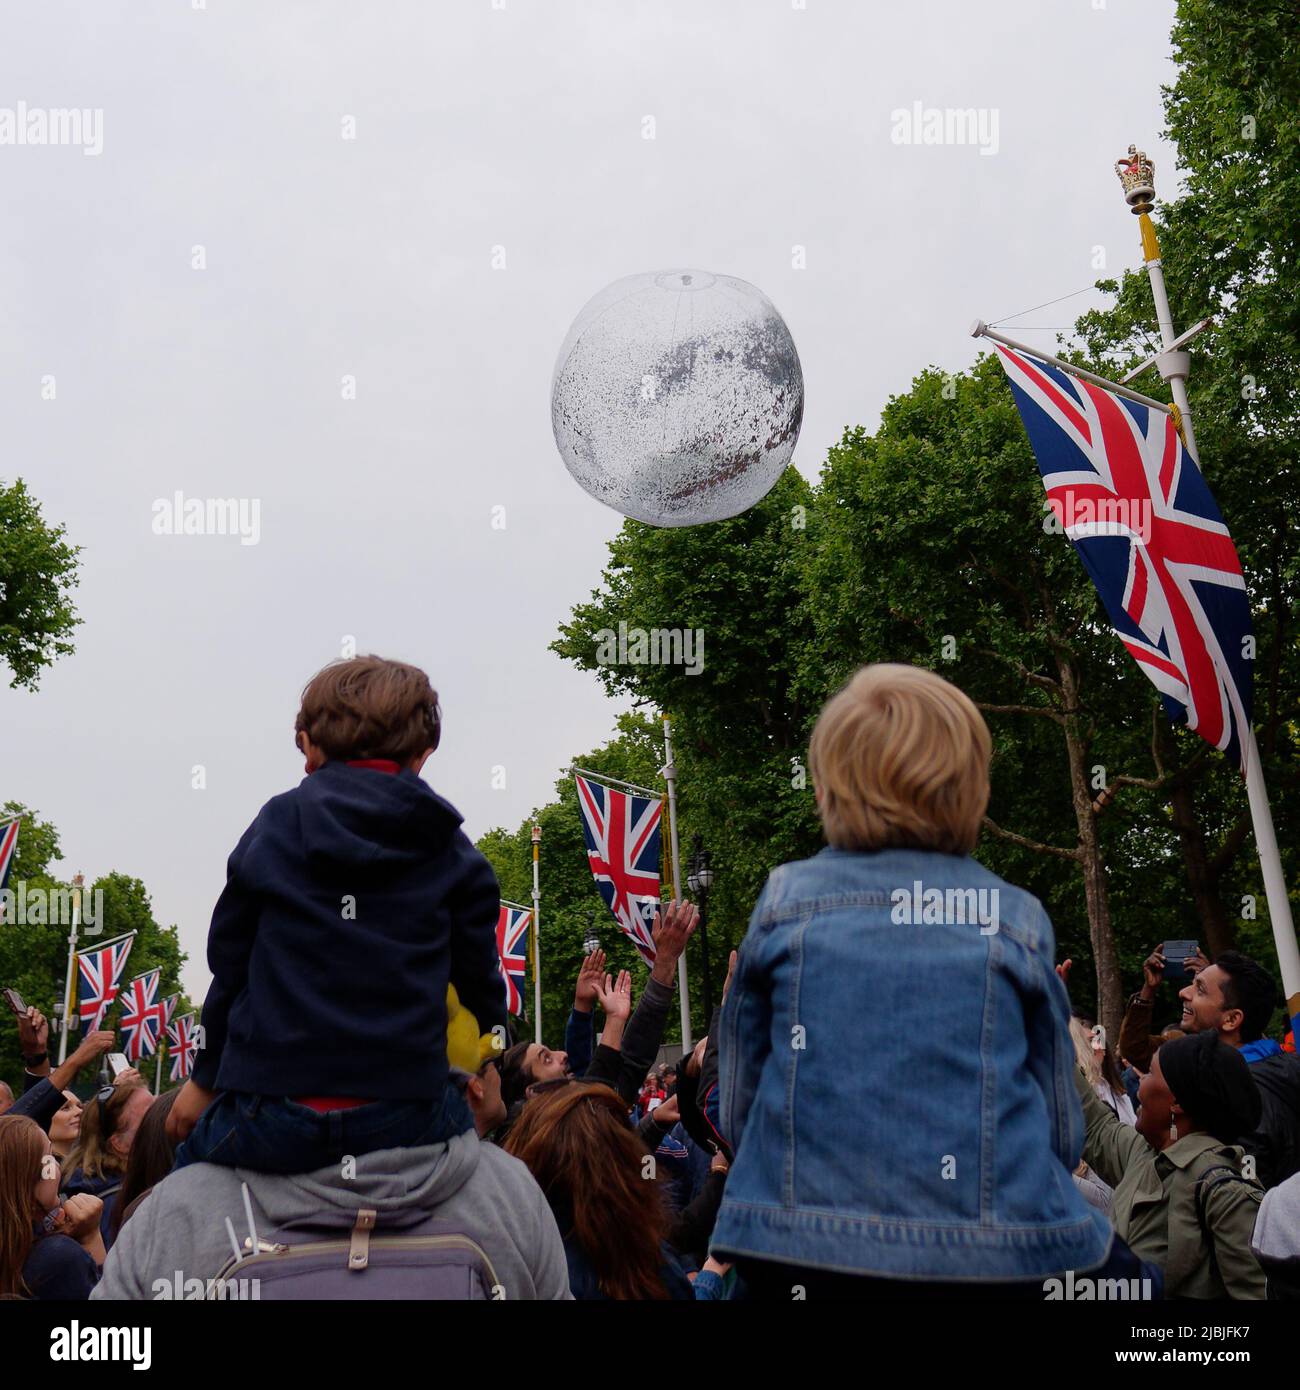 London, Greater London, England, June 04 2022: Jubilee Concert at The Mall. Boys sit on shoulders as people try to hit the ball down the street. Stock Photo